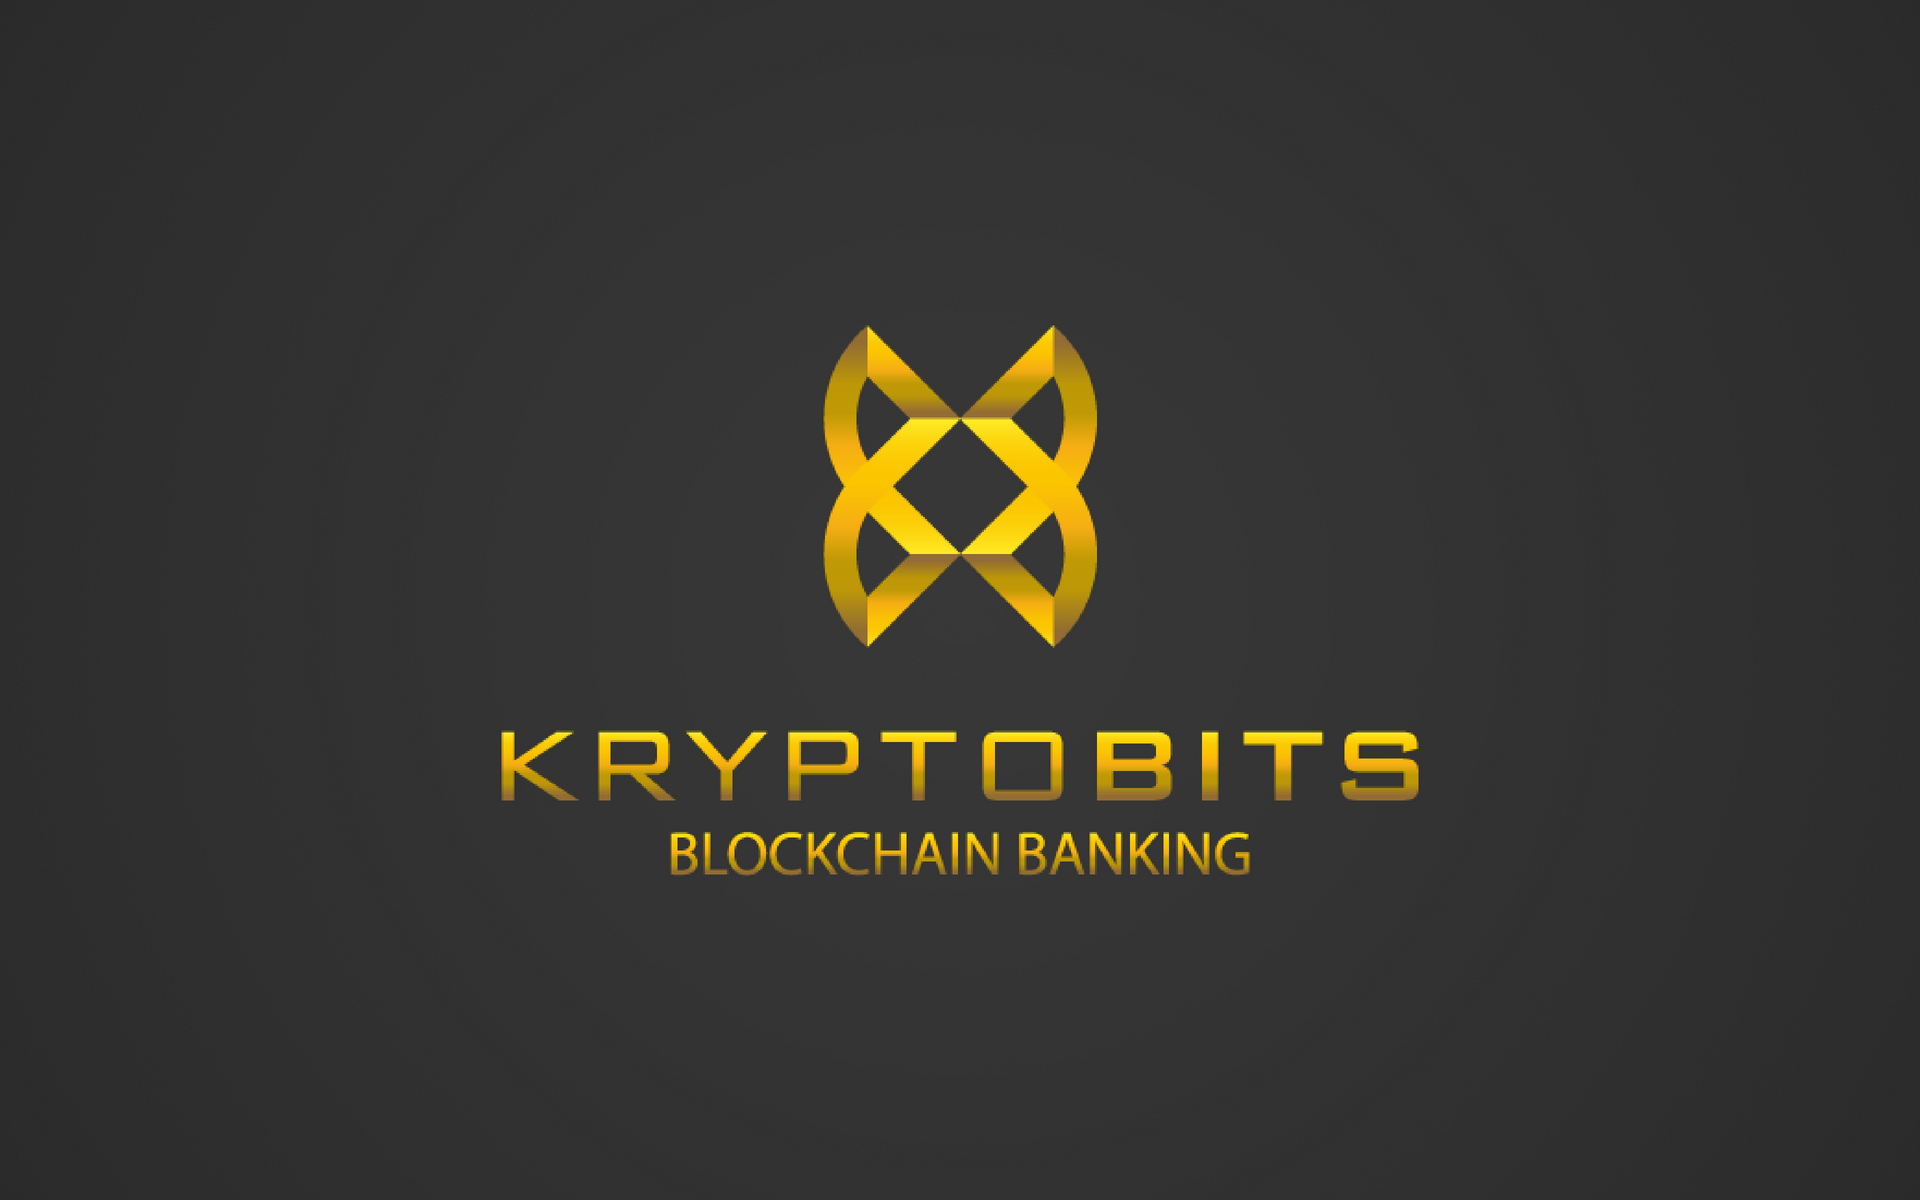 Kryptobits, Friday, June 15, 2018, Press release picture